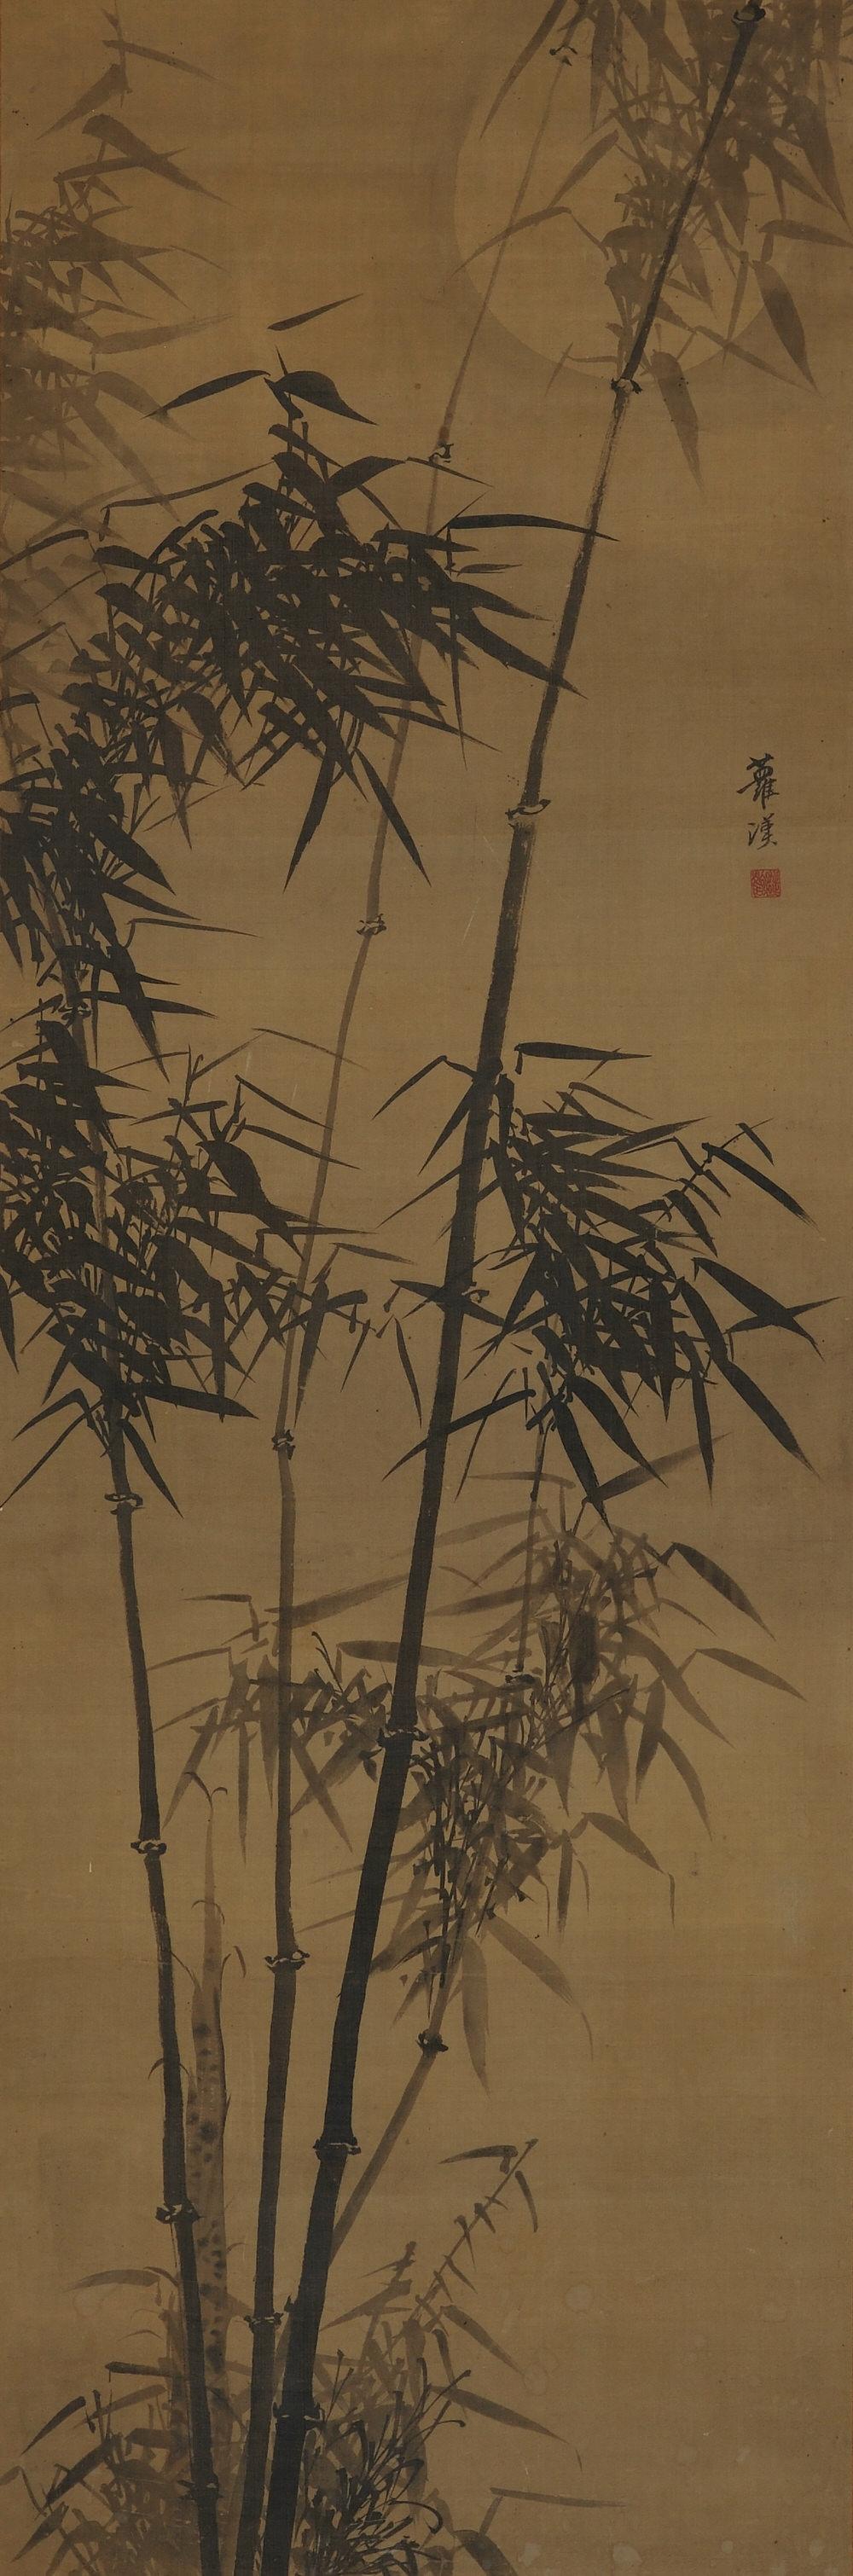 Bamboo in moonlight

Gamo Rakan (1784-1866)

Hanging scroll, ink on silk.

Dimensions:

Scroll: 201 cm x 58 cm

Image: 137 cm x 45 cm

In this early 19th century work by Gamo Rakan a light ink wash applied to the silk background